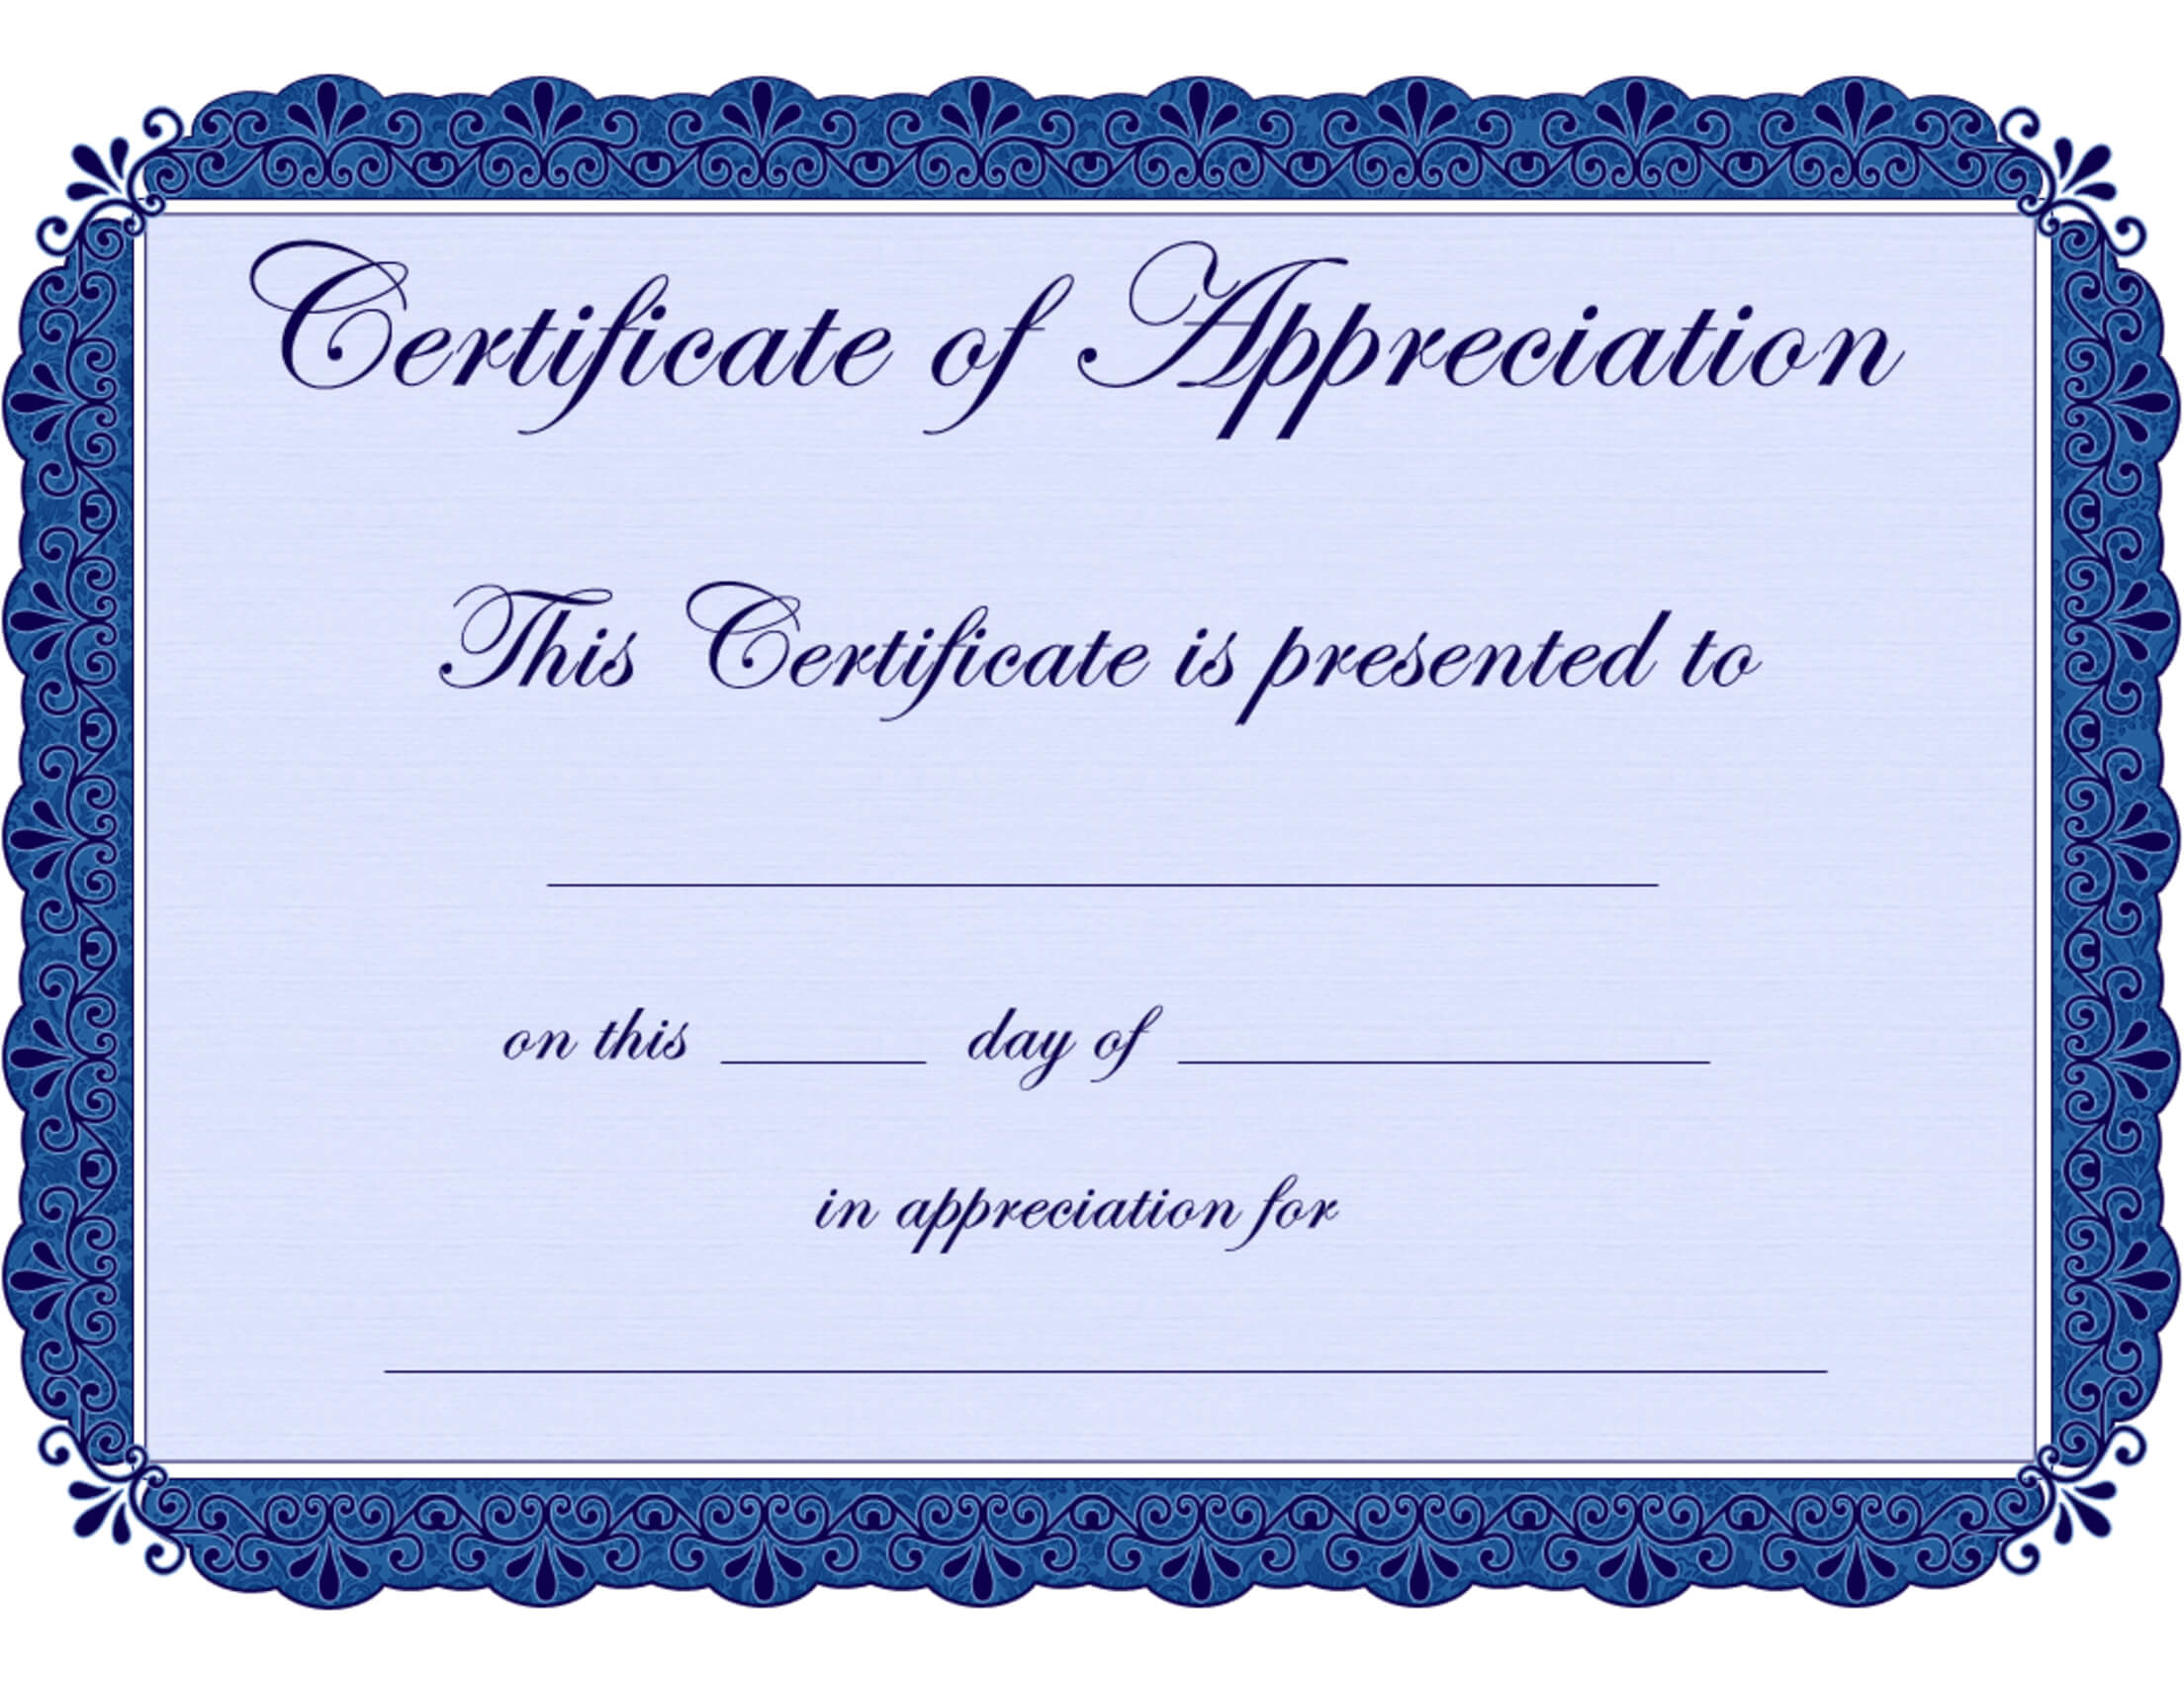 Free Printable Certificates Certificate Of Appreciation With Free Template For Certificate Of Recognition